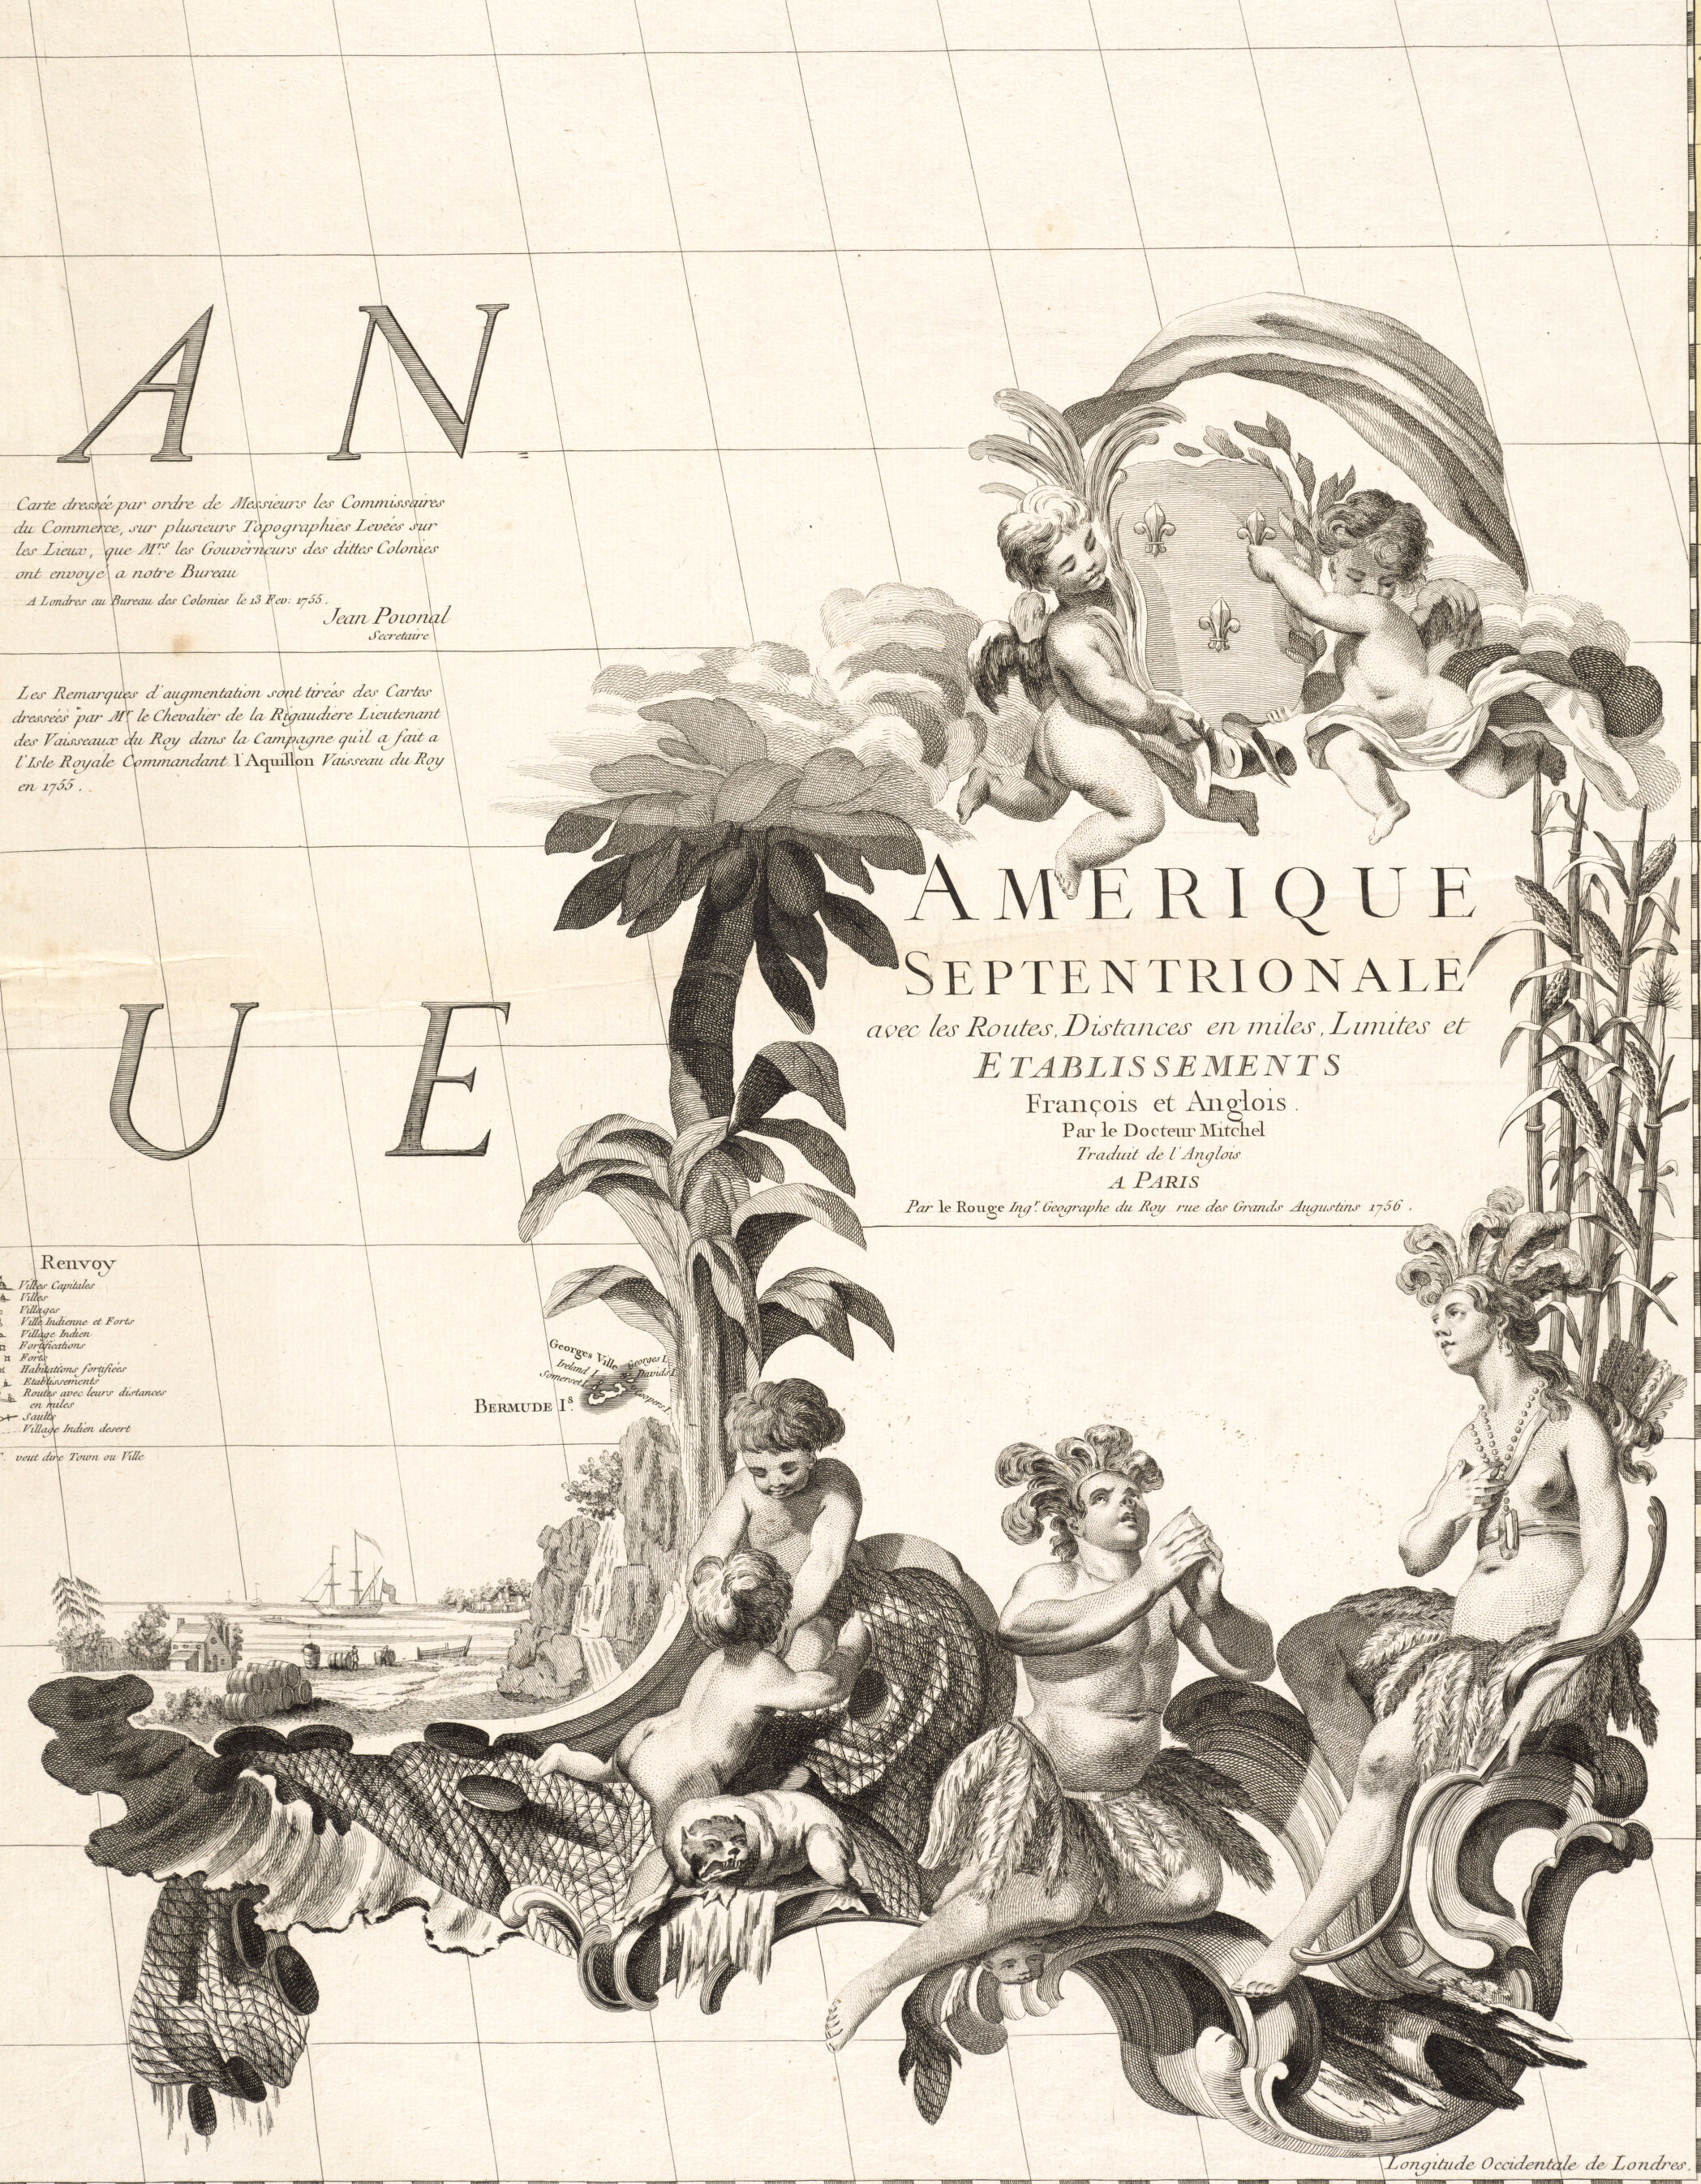 An image of an elaborate map cartouche featuring cherubim, allegorical figures meant to represent Native Americans framed by a rococo border made of plants and animals. A  ship appears in the distance.